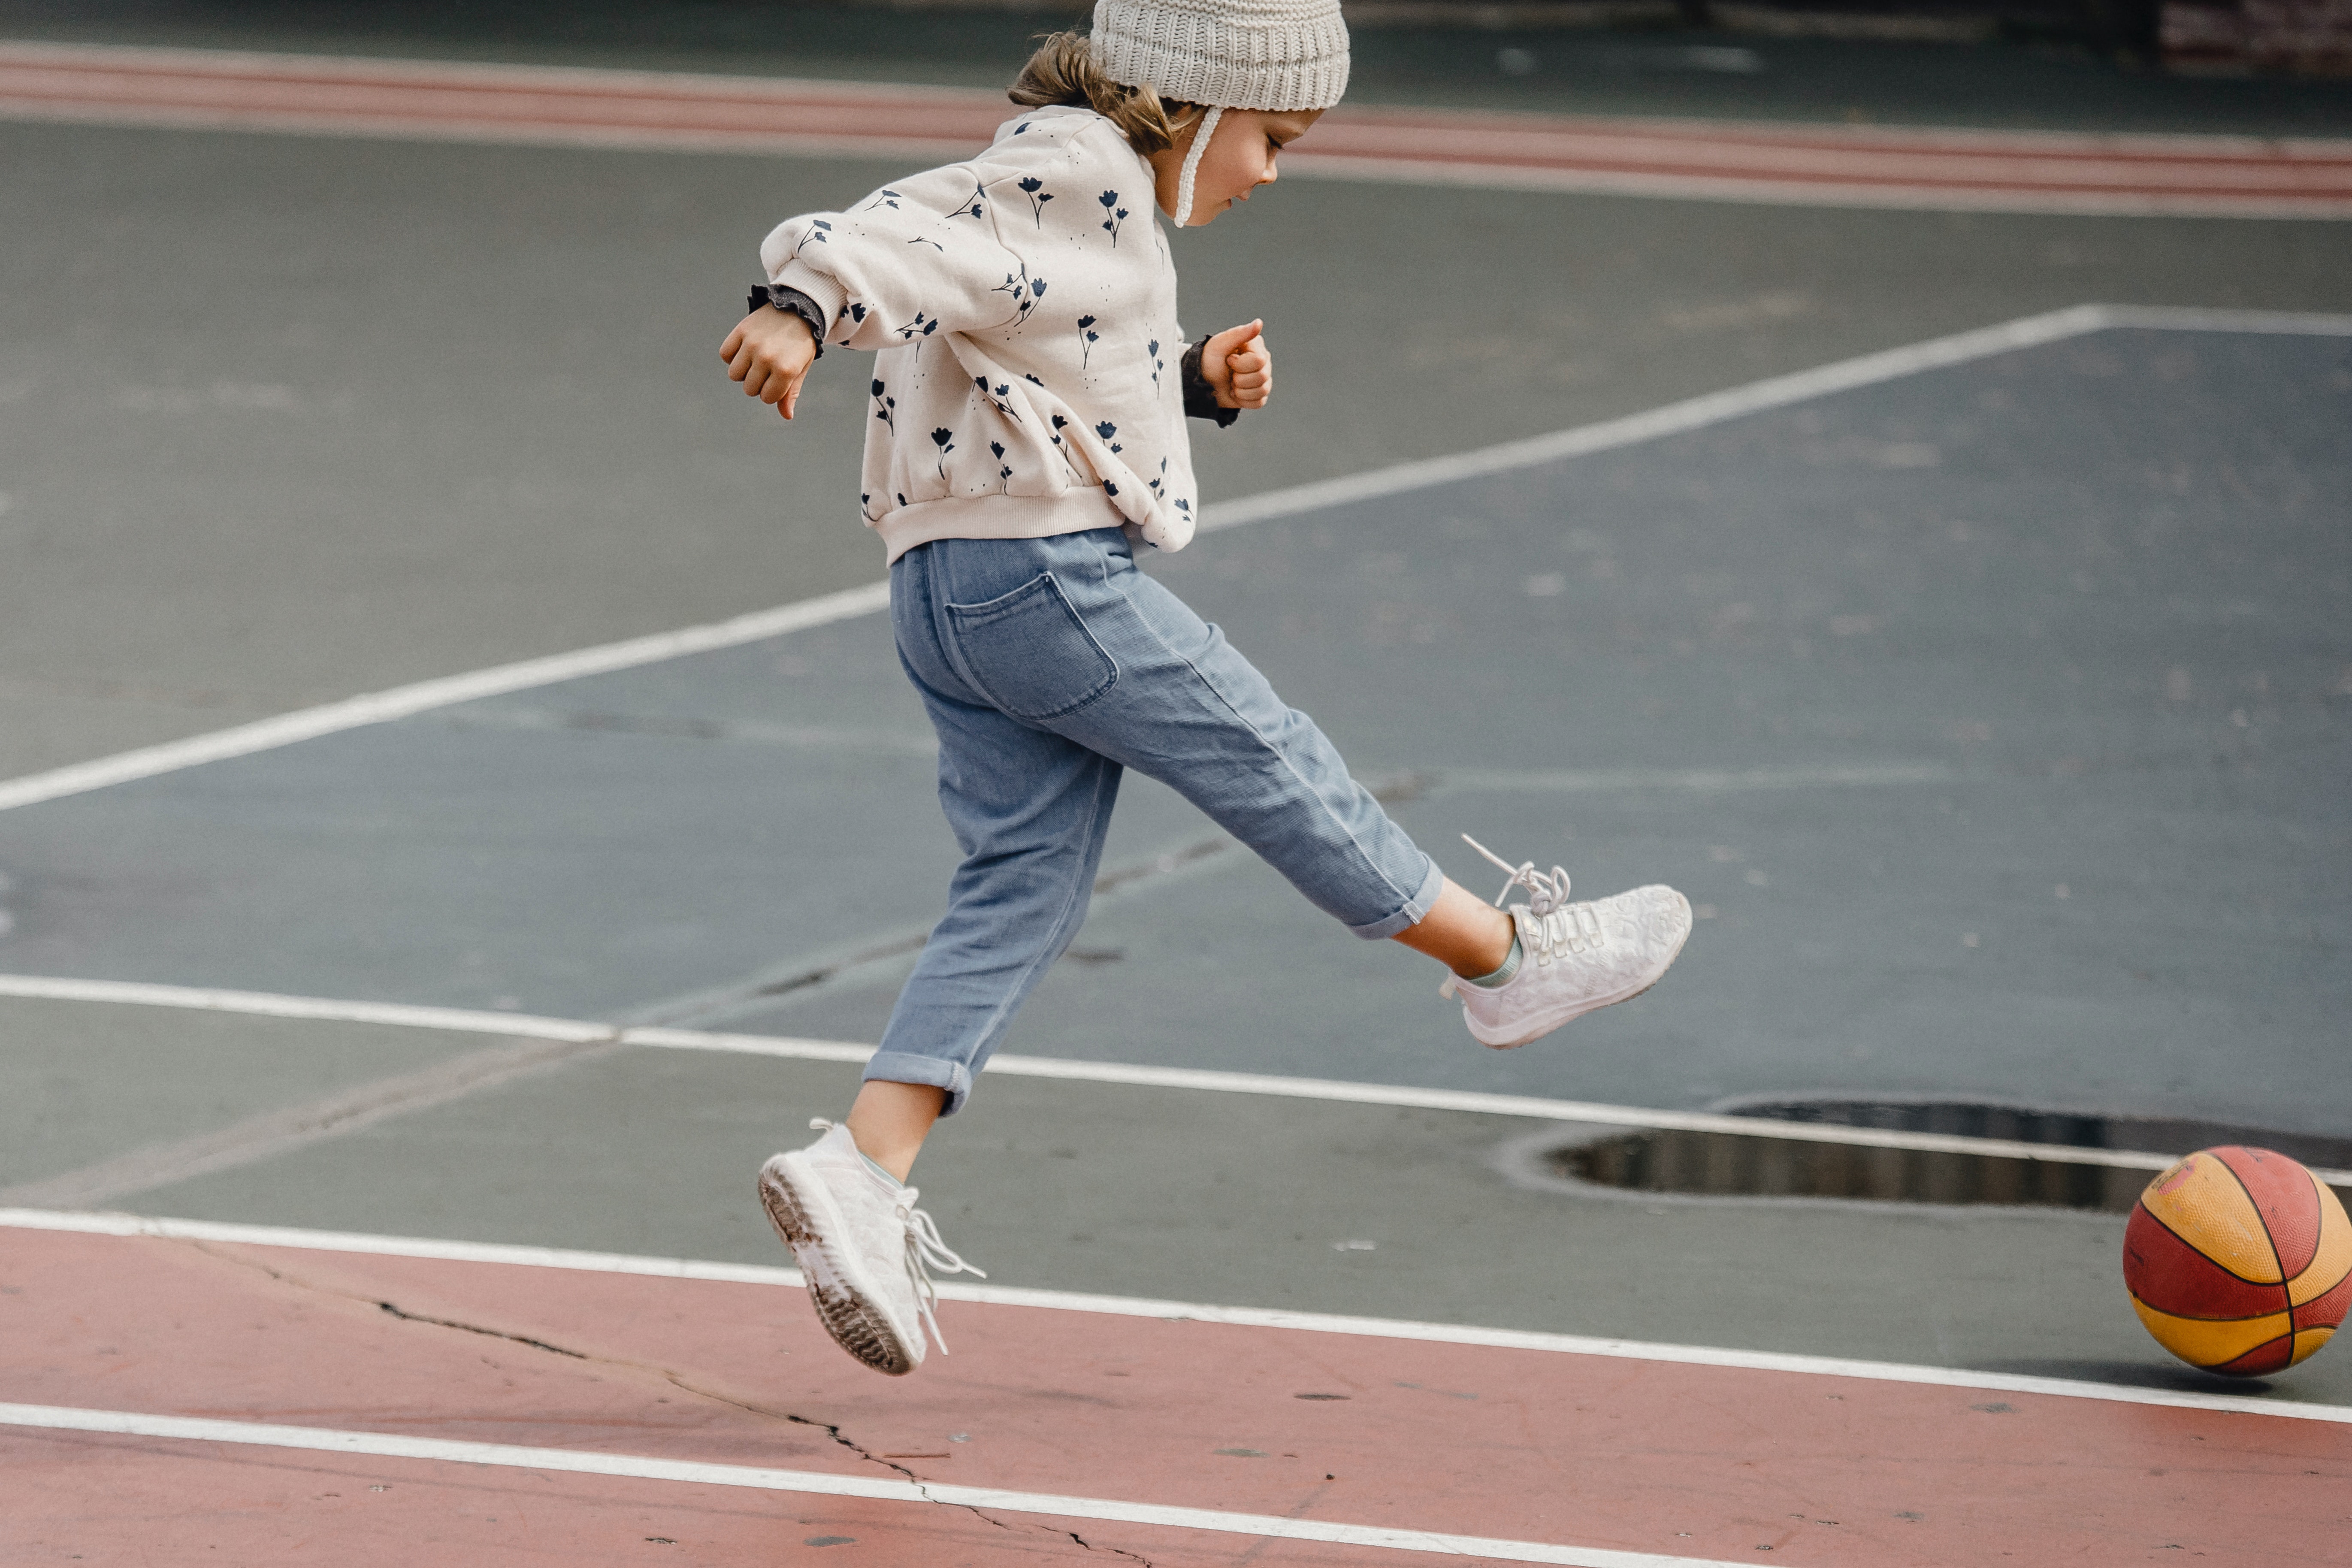 photo by allan mas: https://www.pexels.com/photo/little-girl-jumping-while-playing-with-ball-on-sports-ground-5623062/